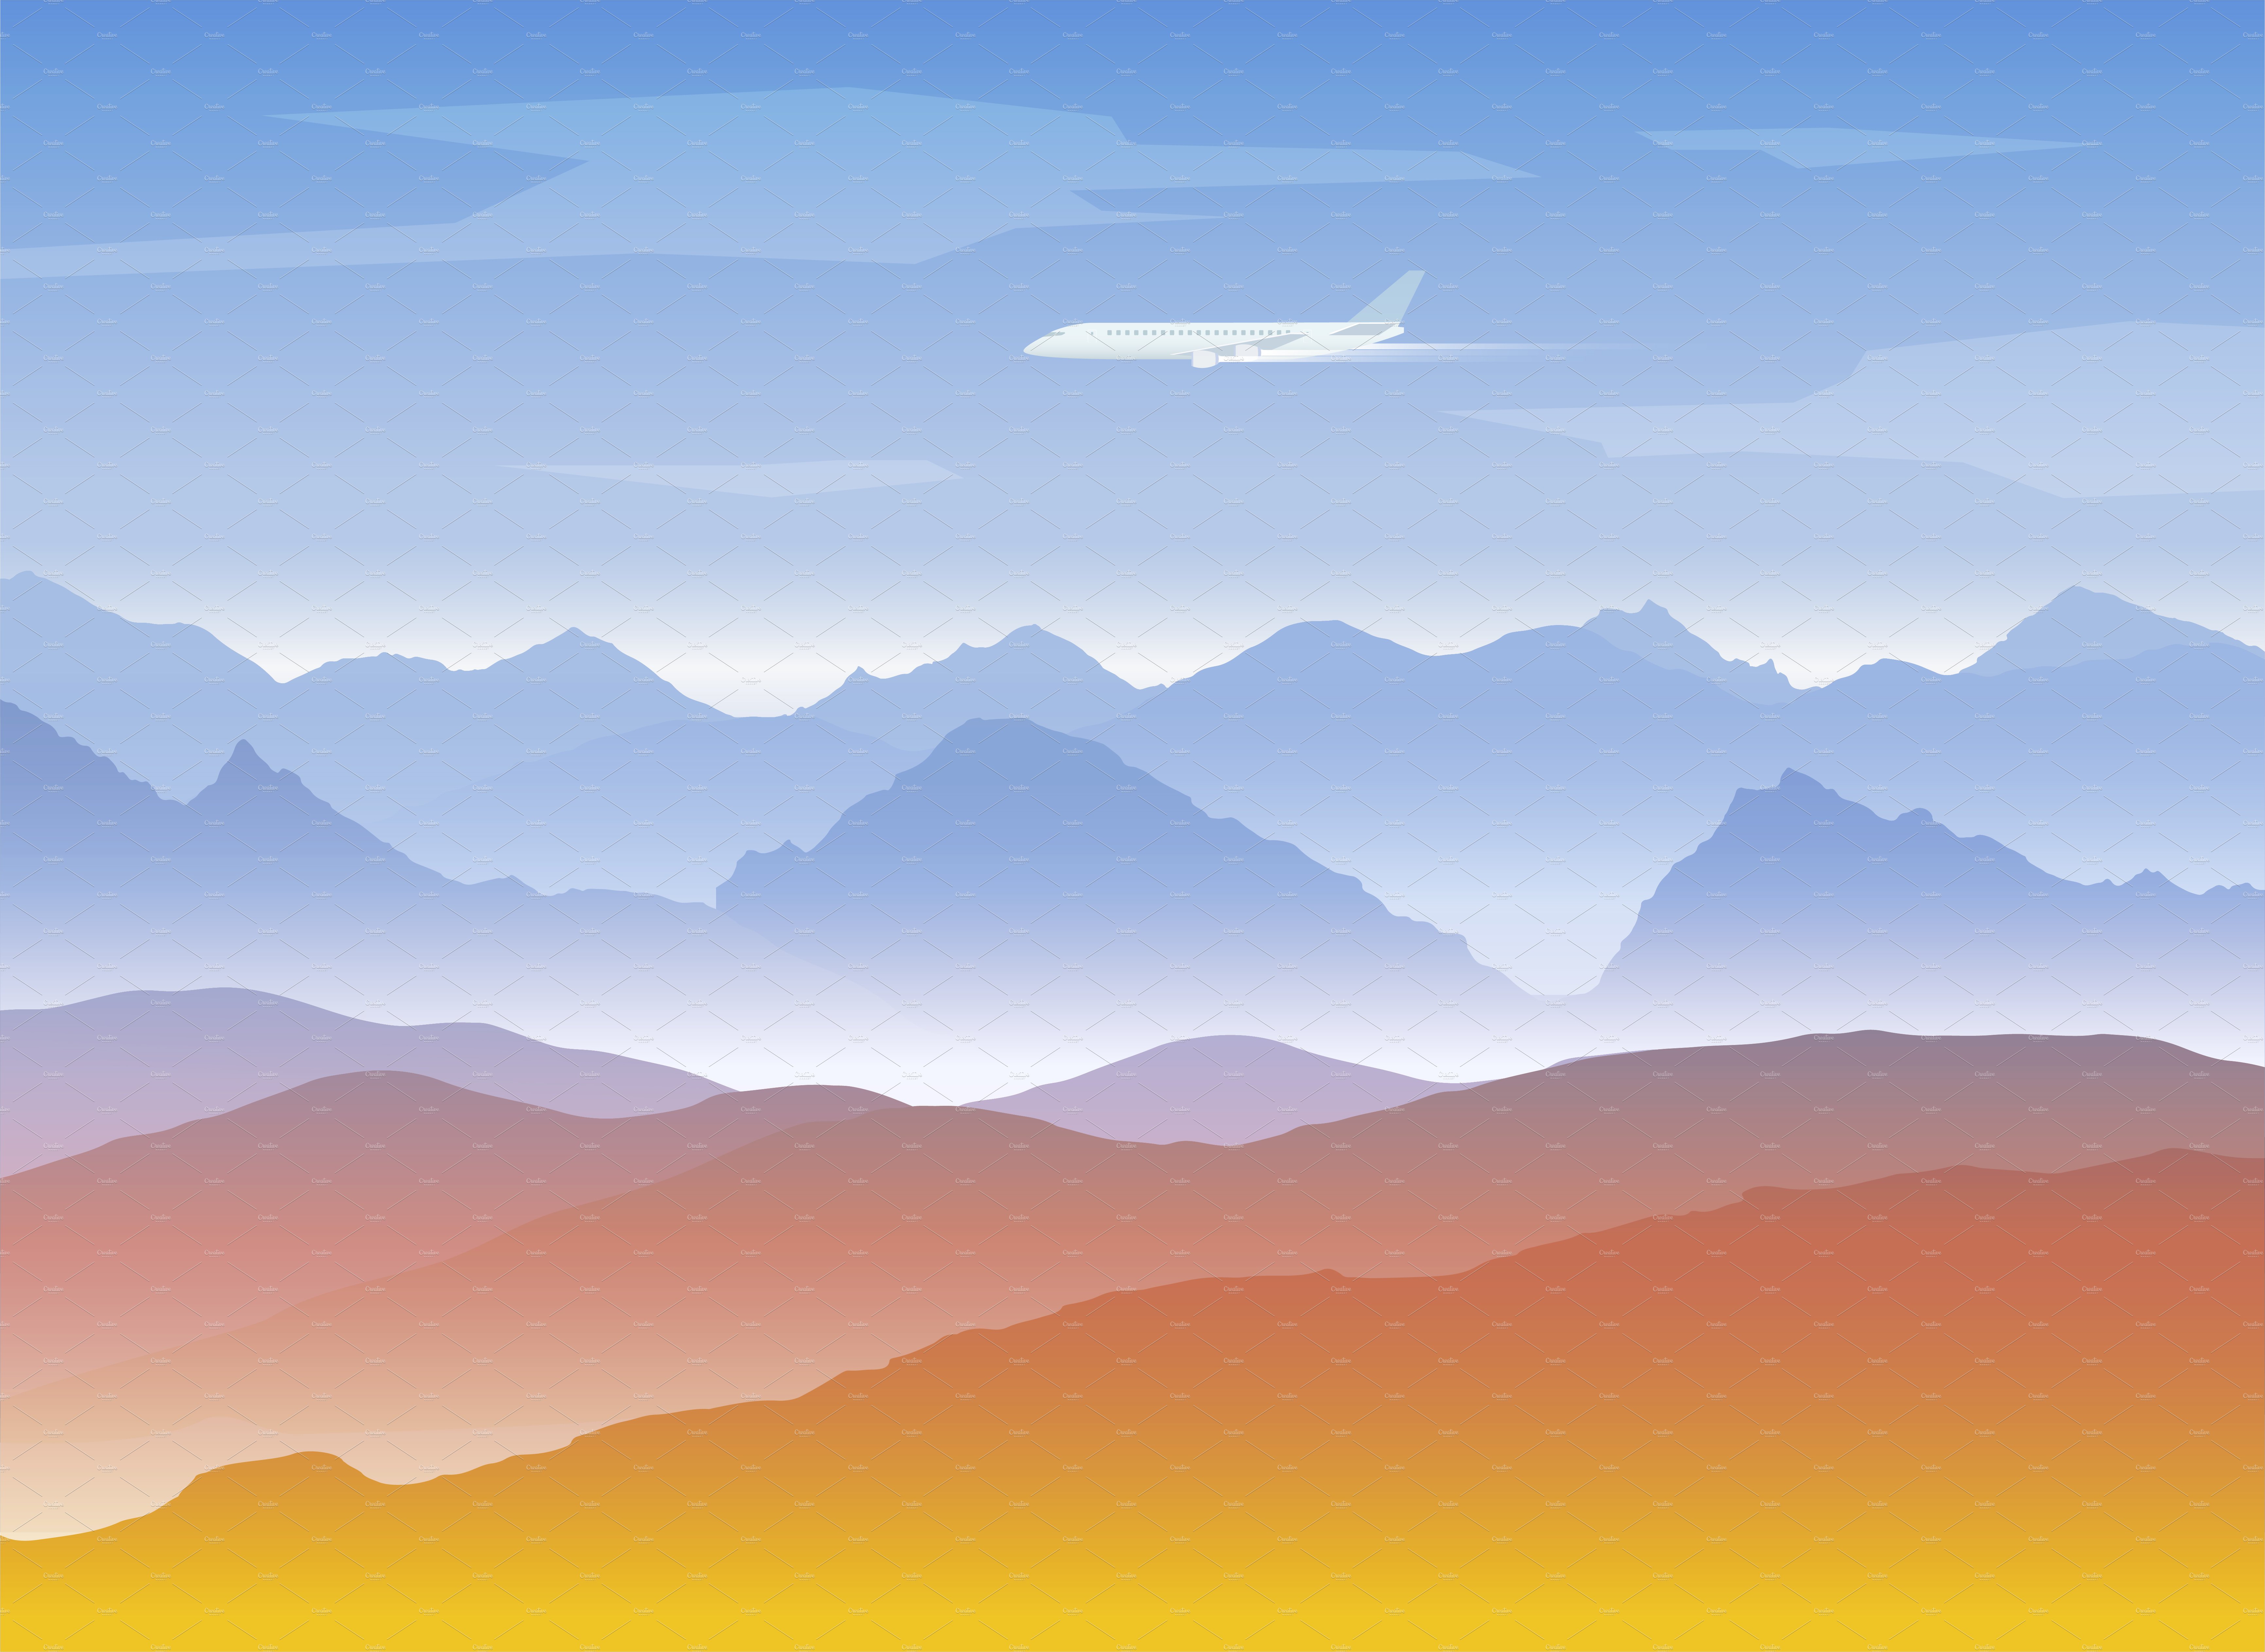 Mountains background set cover image.